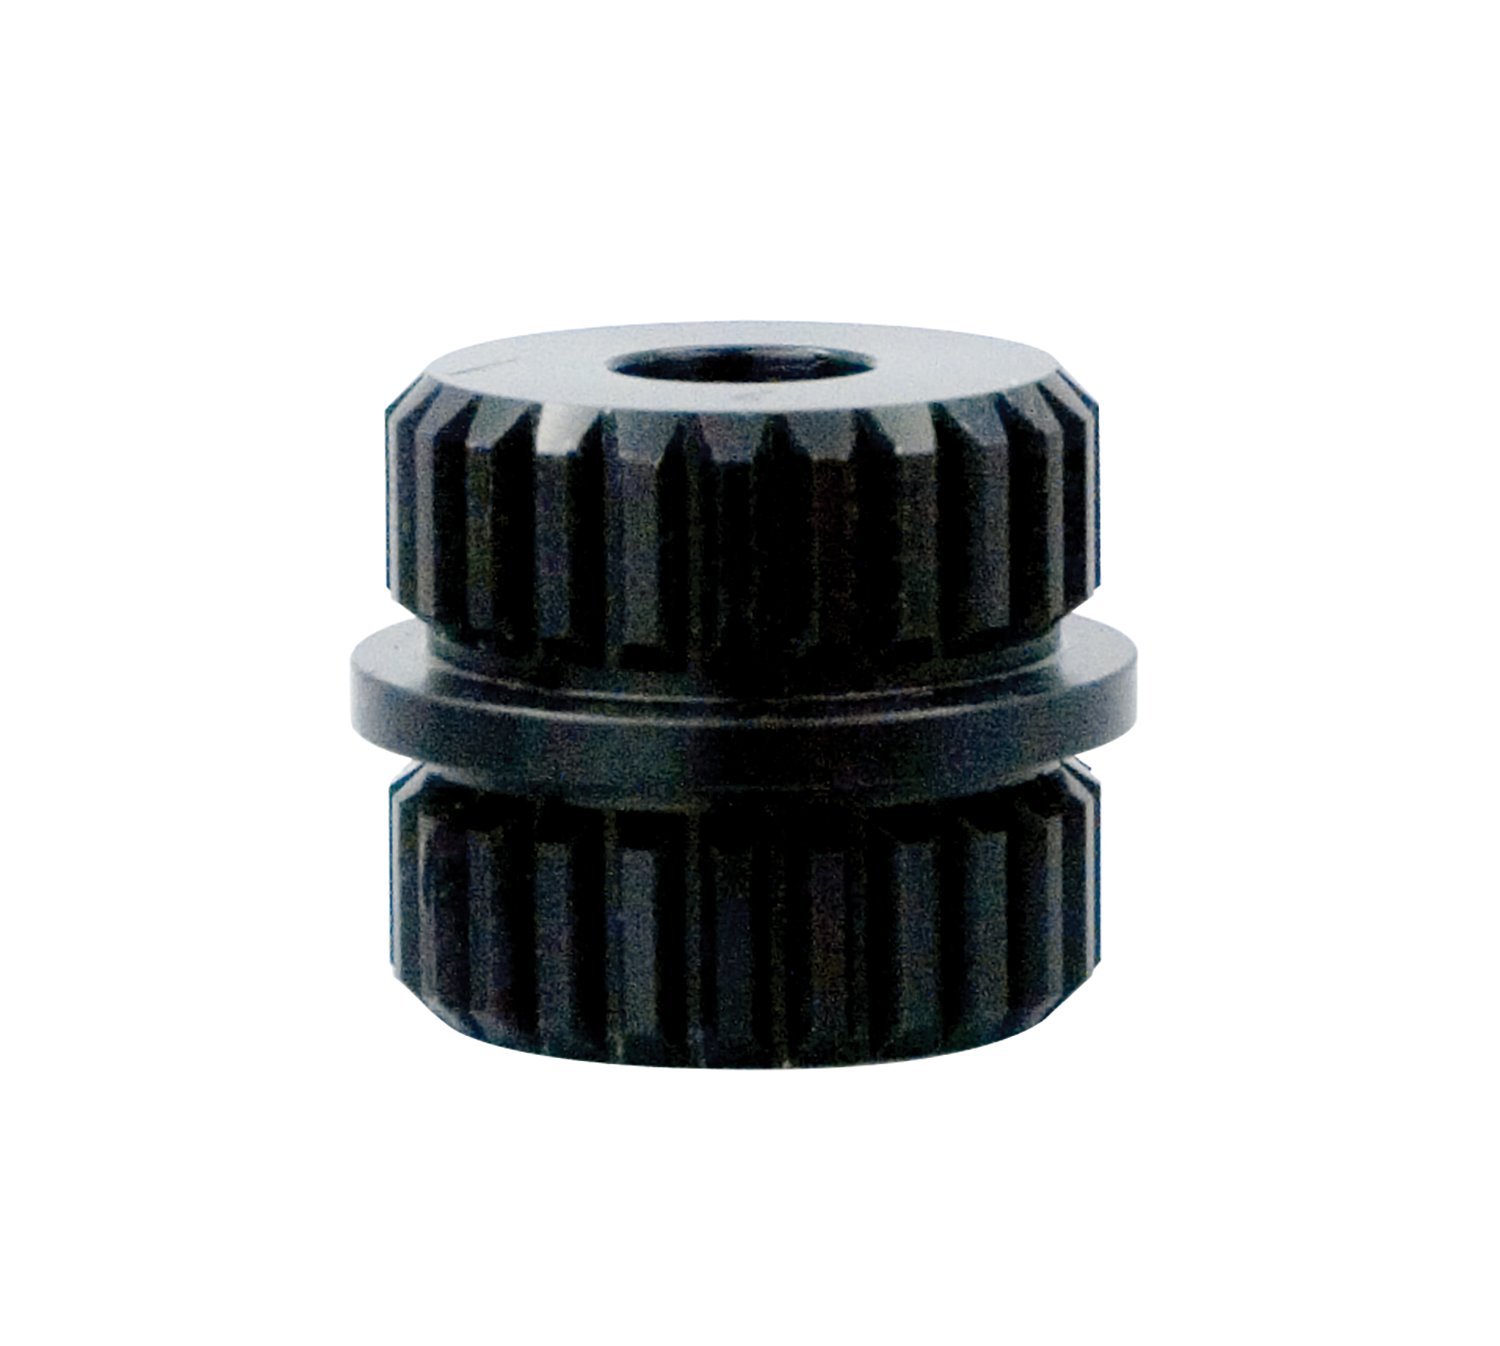 Stack Adapter With 2.25" Washer